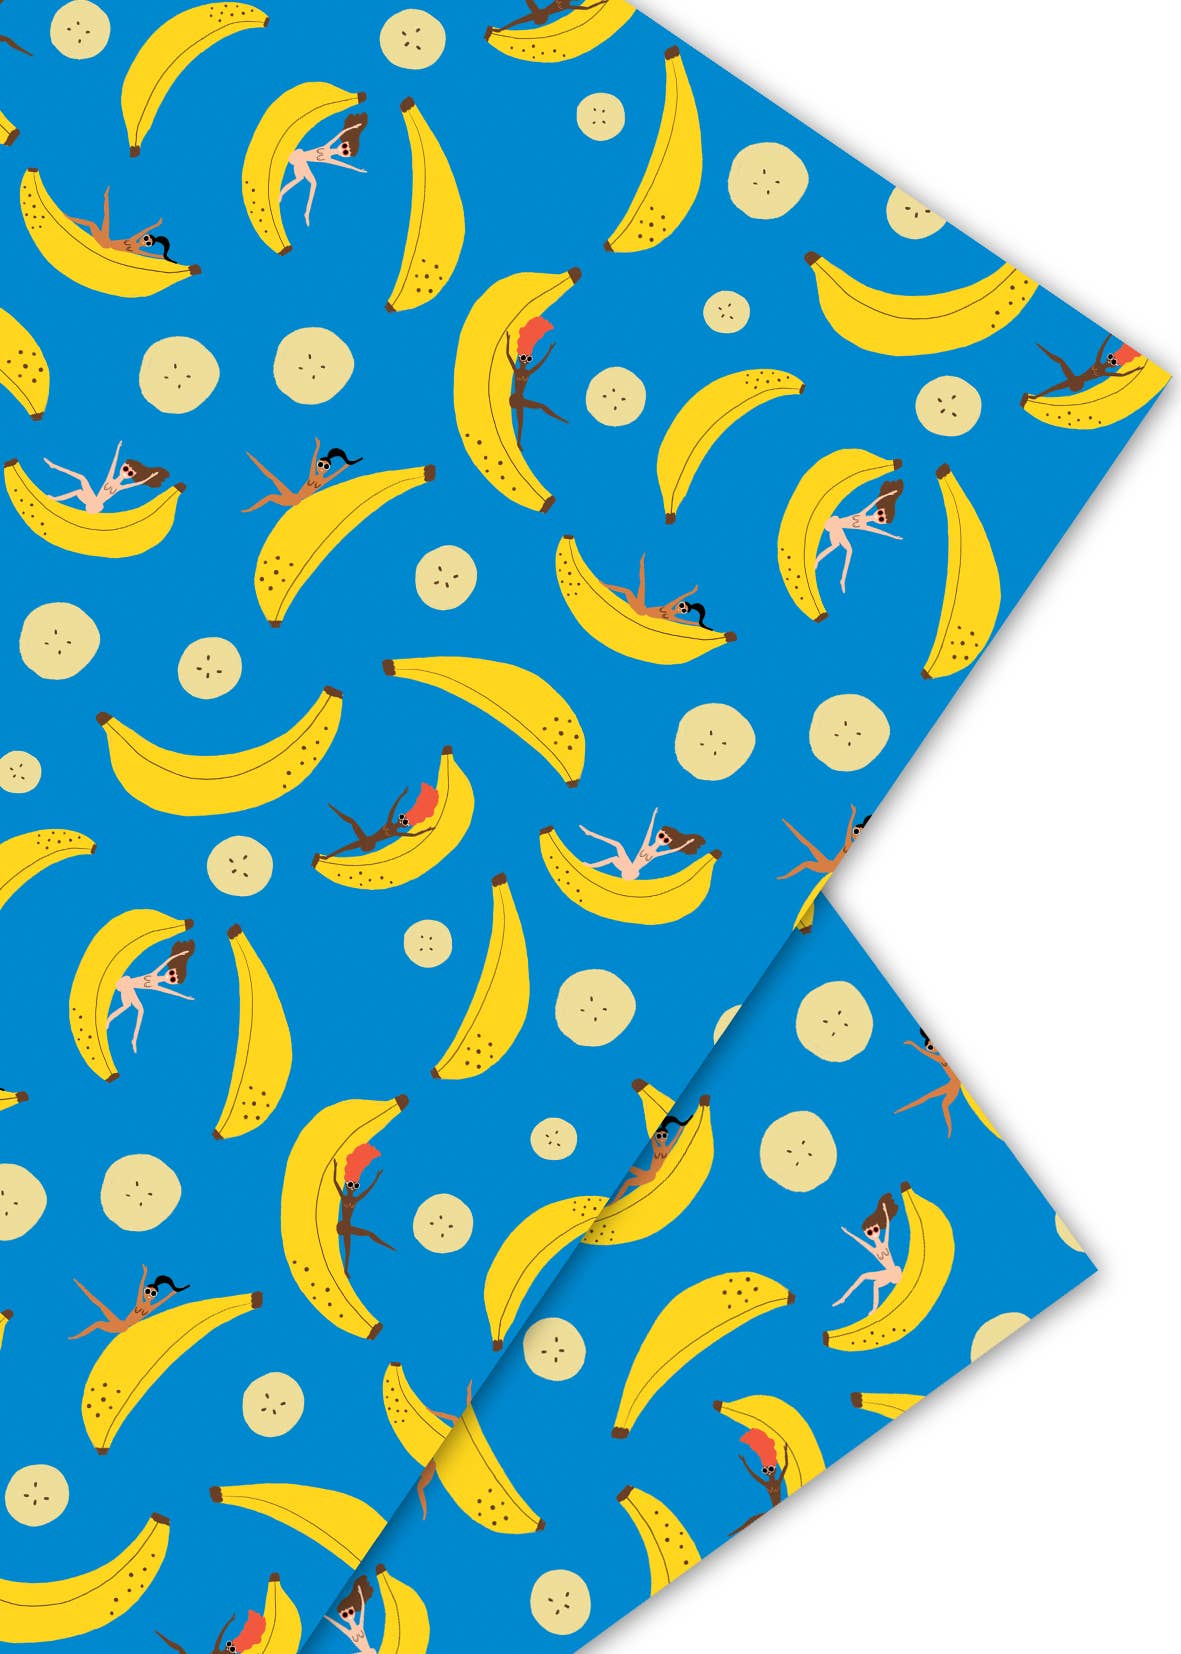 Single sheet of wrapping paper --- design is blue with both sliced and whole bananas on it with women in bikinis sliding down the whole bananas. 